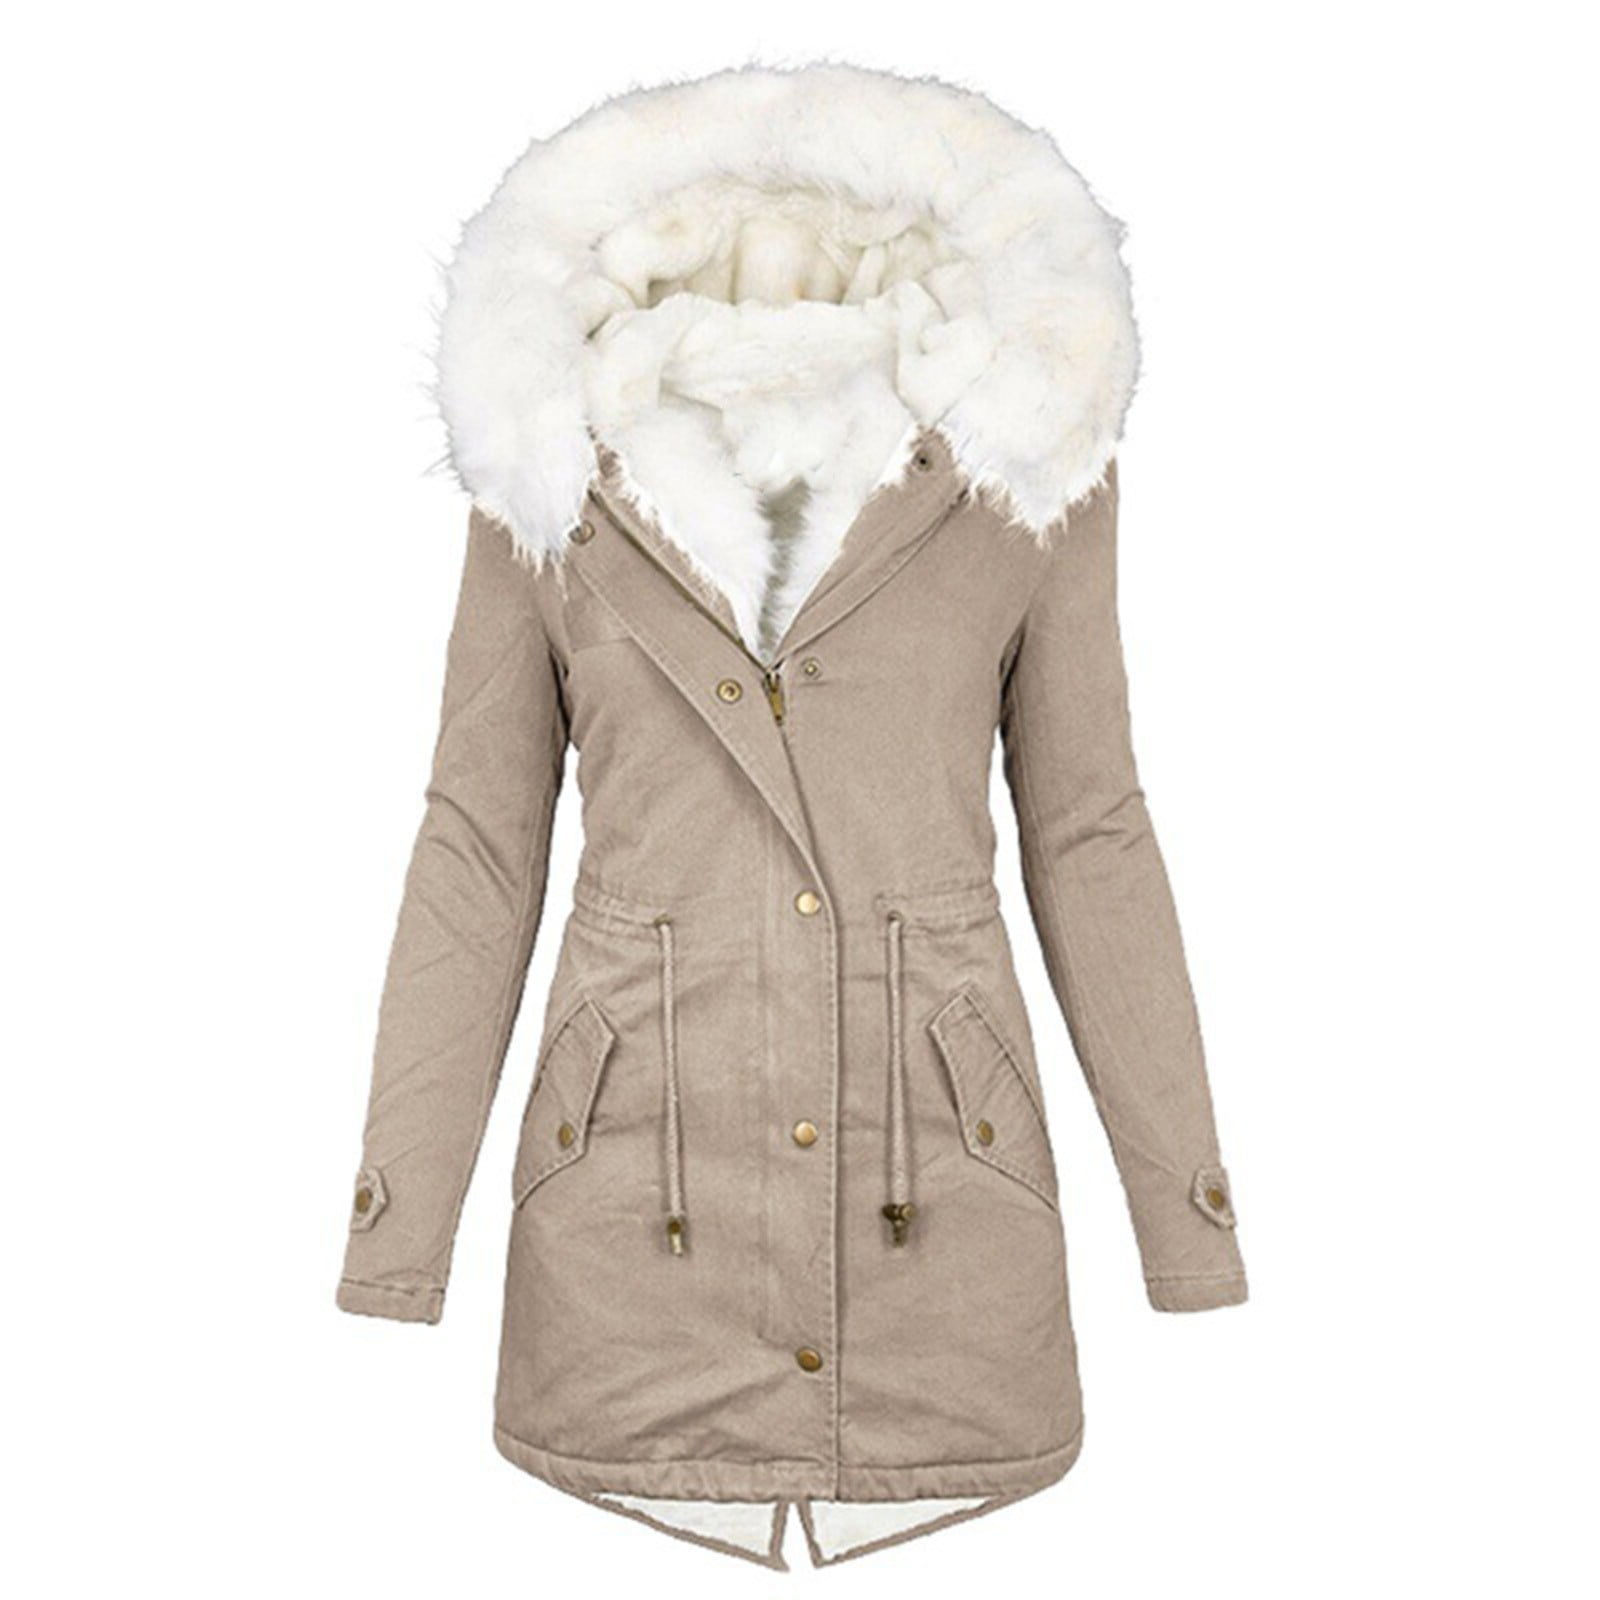 RQYYD Winter Coats for Women, Women's Winter Warm Jackets Lined Thick ...